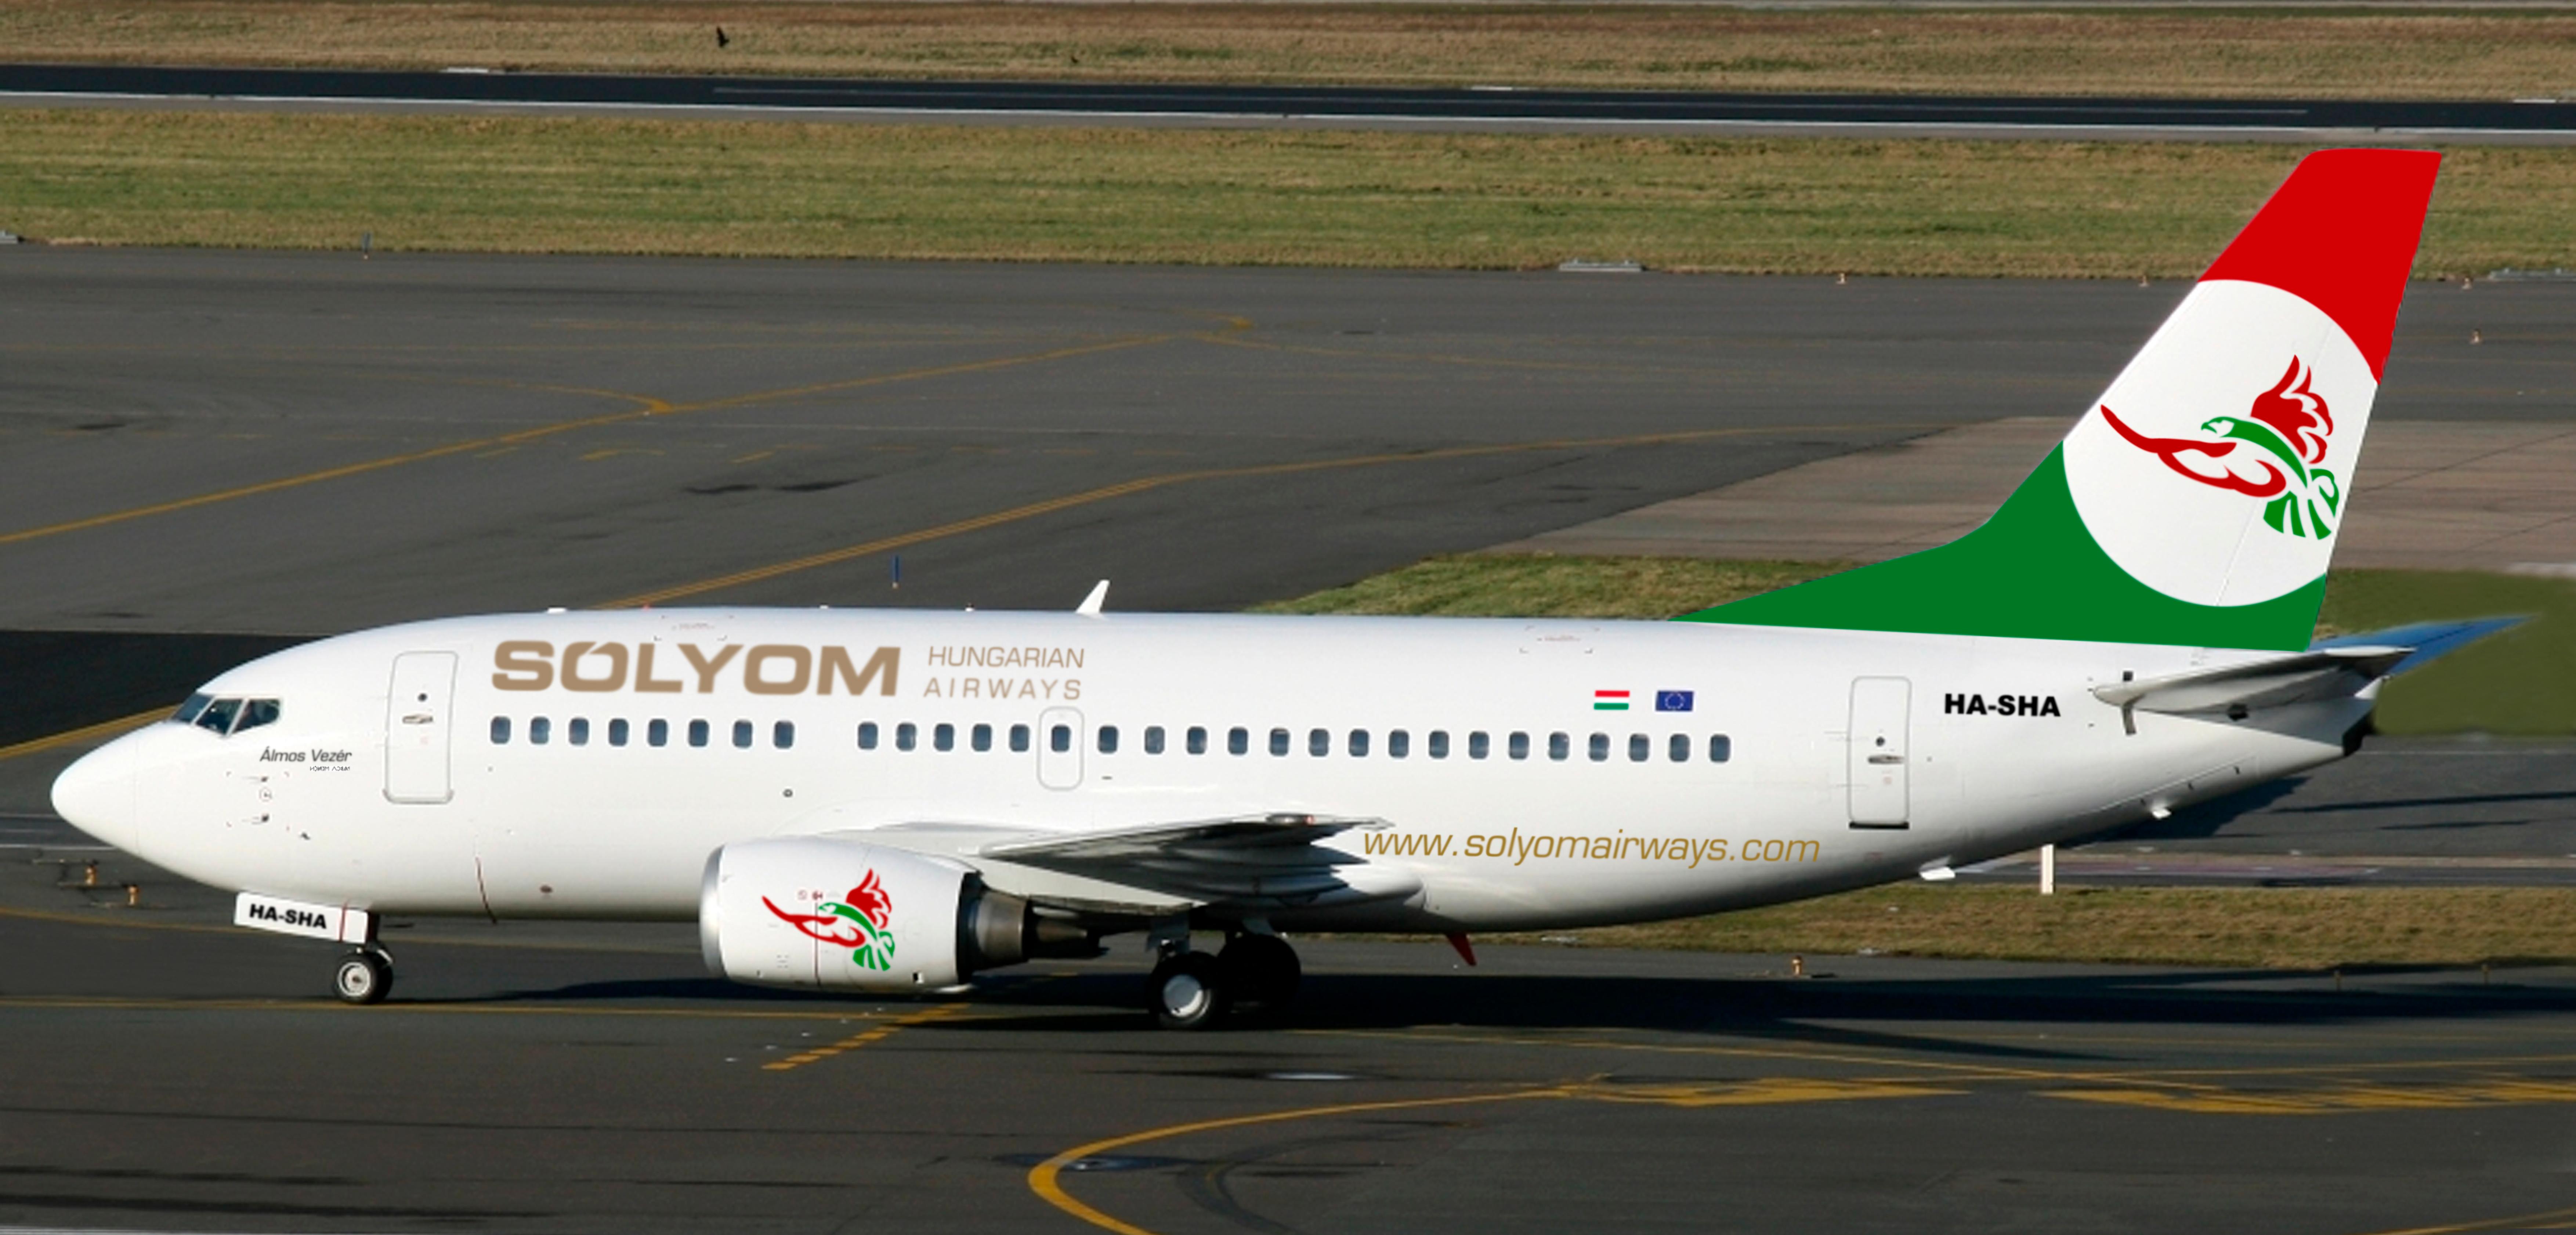 Sólyom’s CEO Optimistic About Airline’ Prospects – An Interview